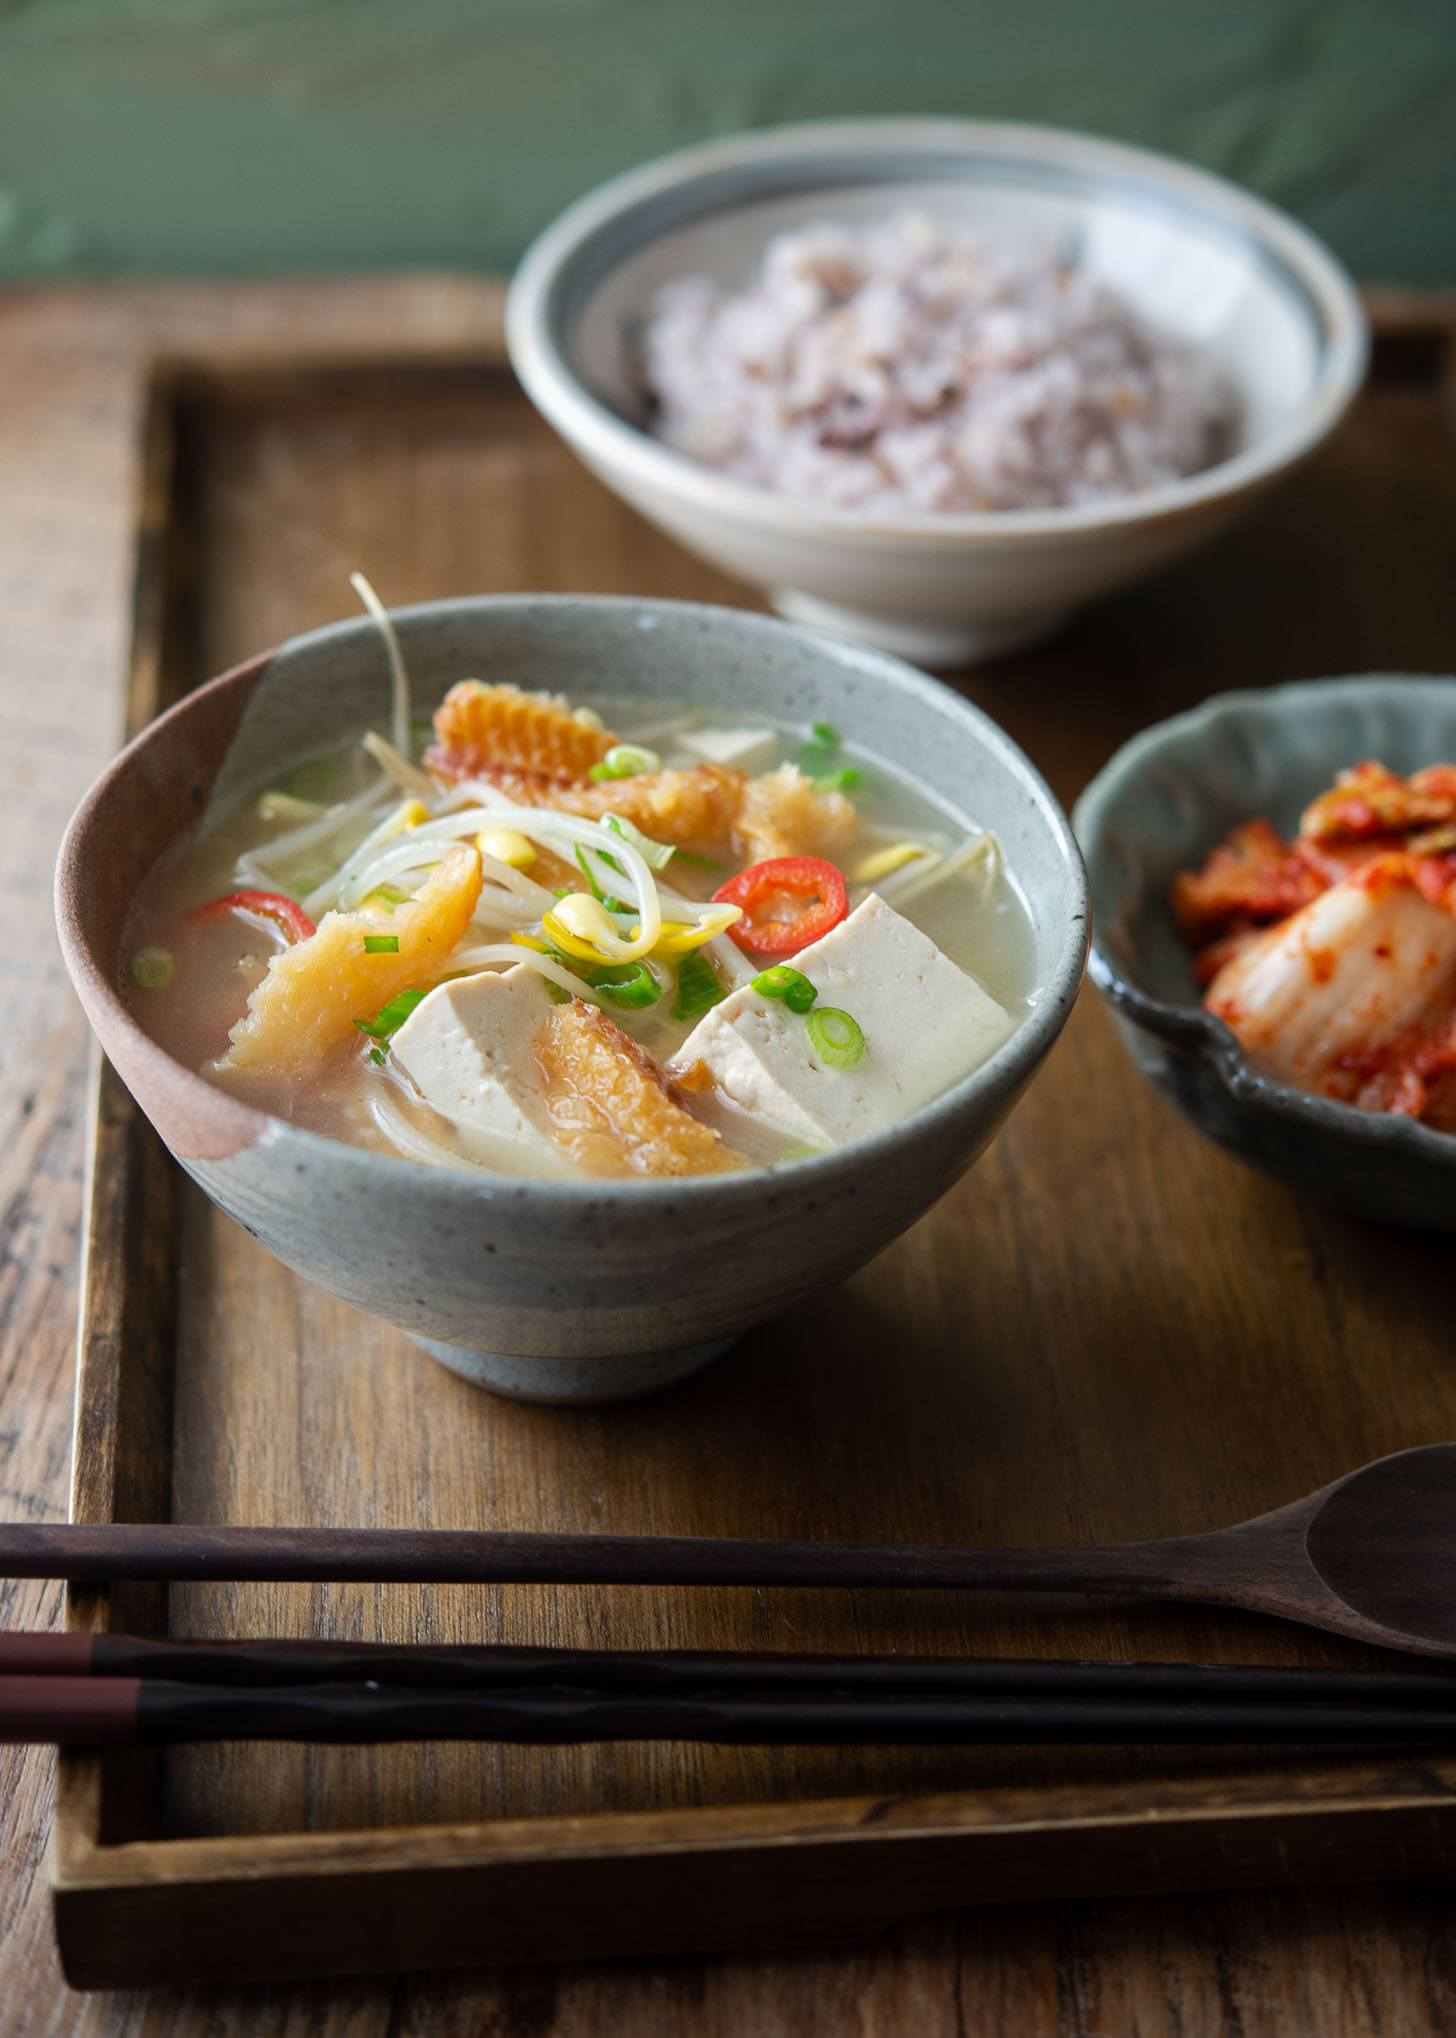 Bugeo guk is light hangover soup made with dried pollock